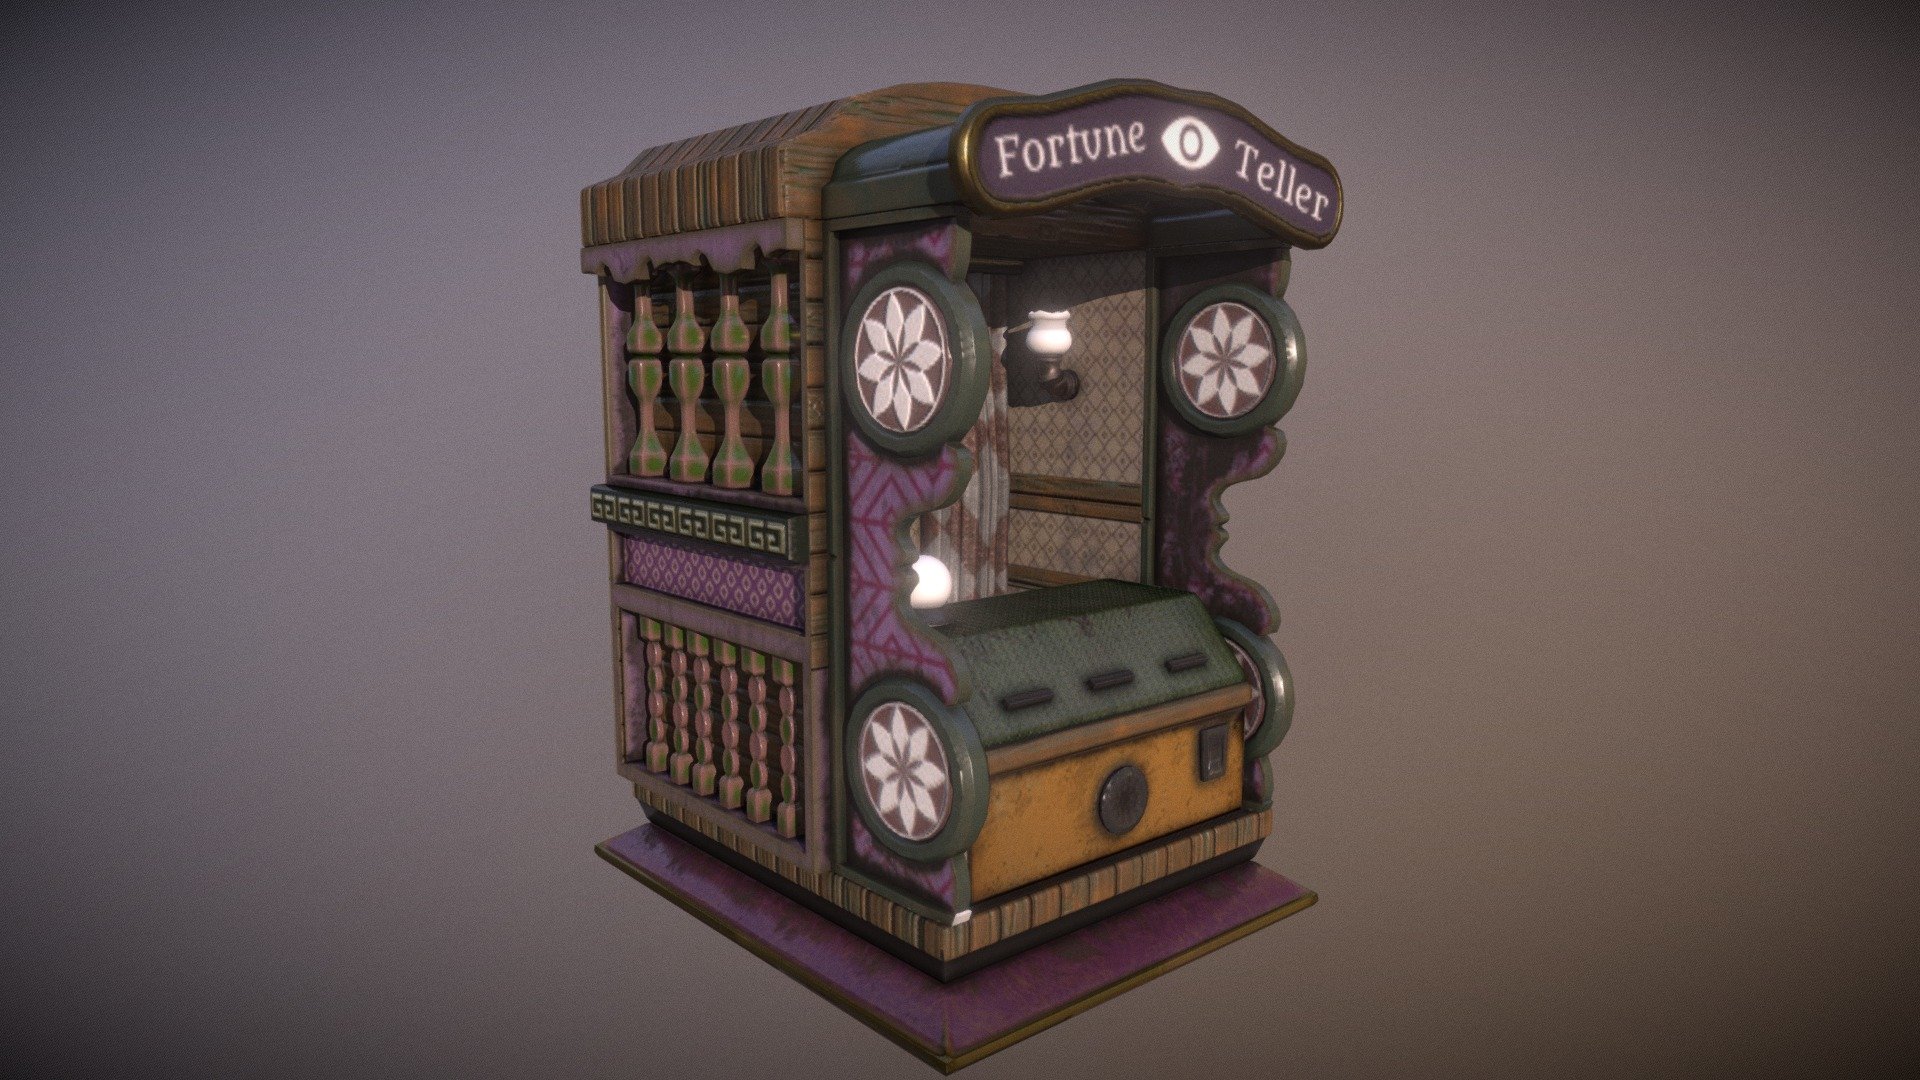 This piece is a fortune telling machine, meant to hold a mystical animatronic, who is capable of both predicting and fullfilling, the future of its useer.

This is a Mesh and texture made for a project. Current accreditations are pending, but the all parts of this asset were made by me on maya and substance painter 3d model